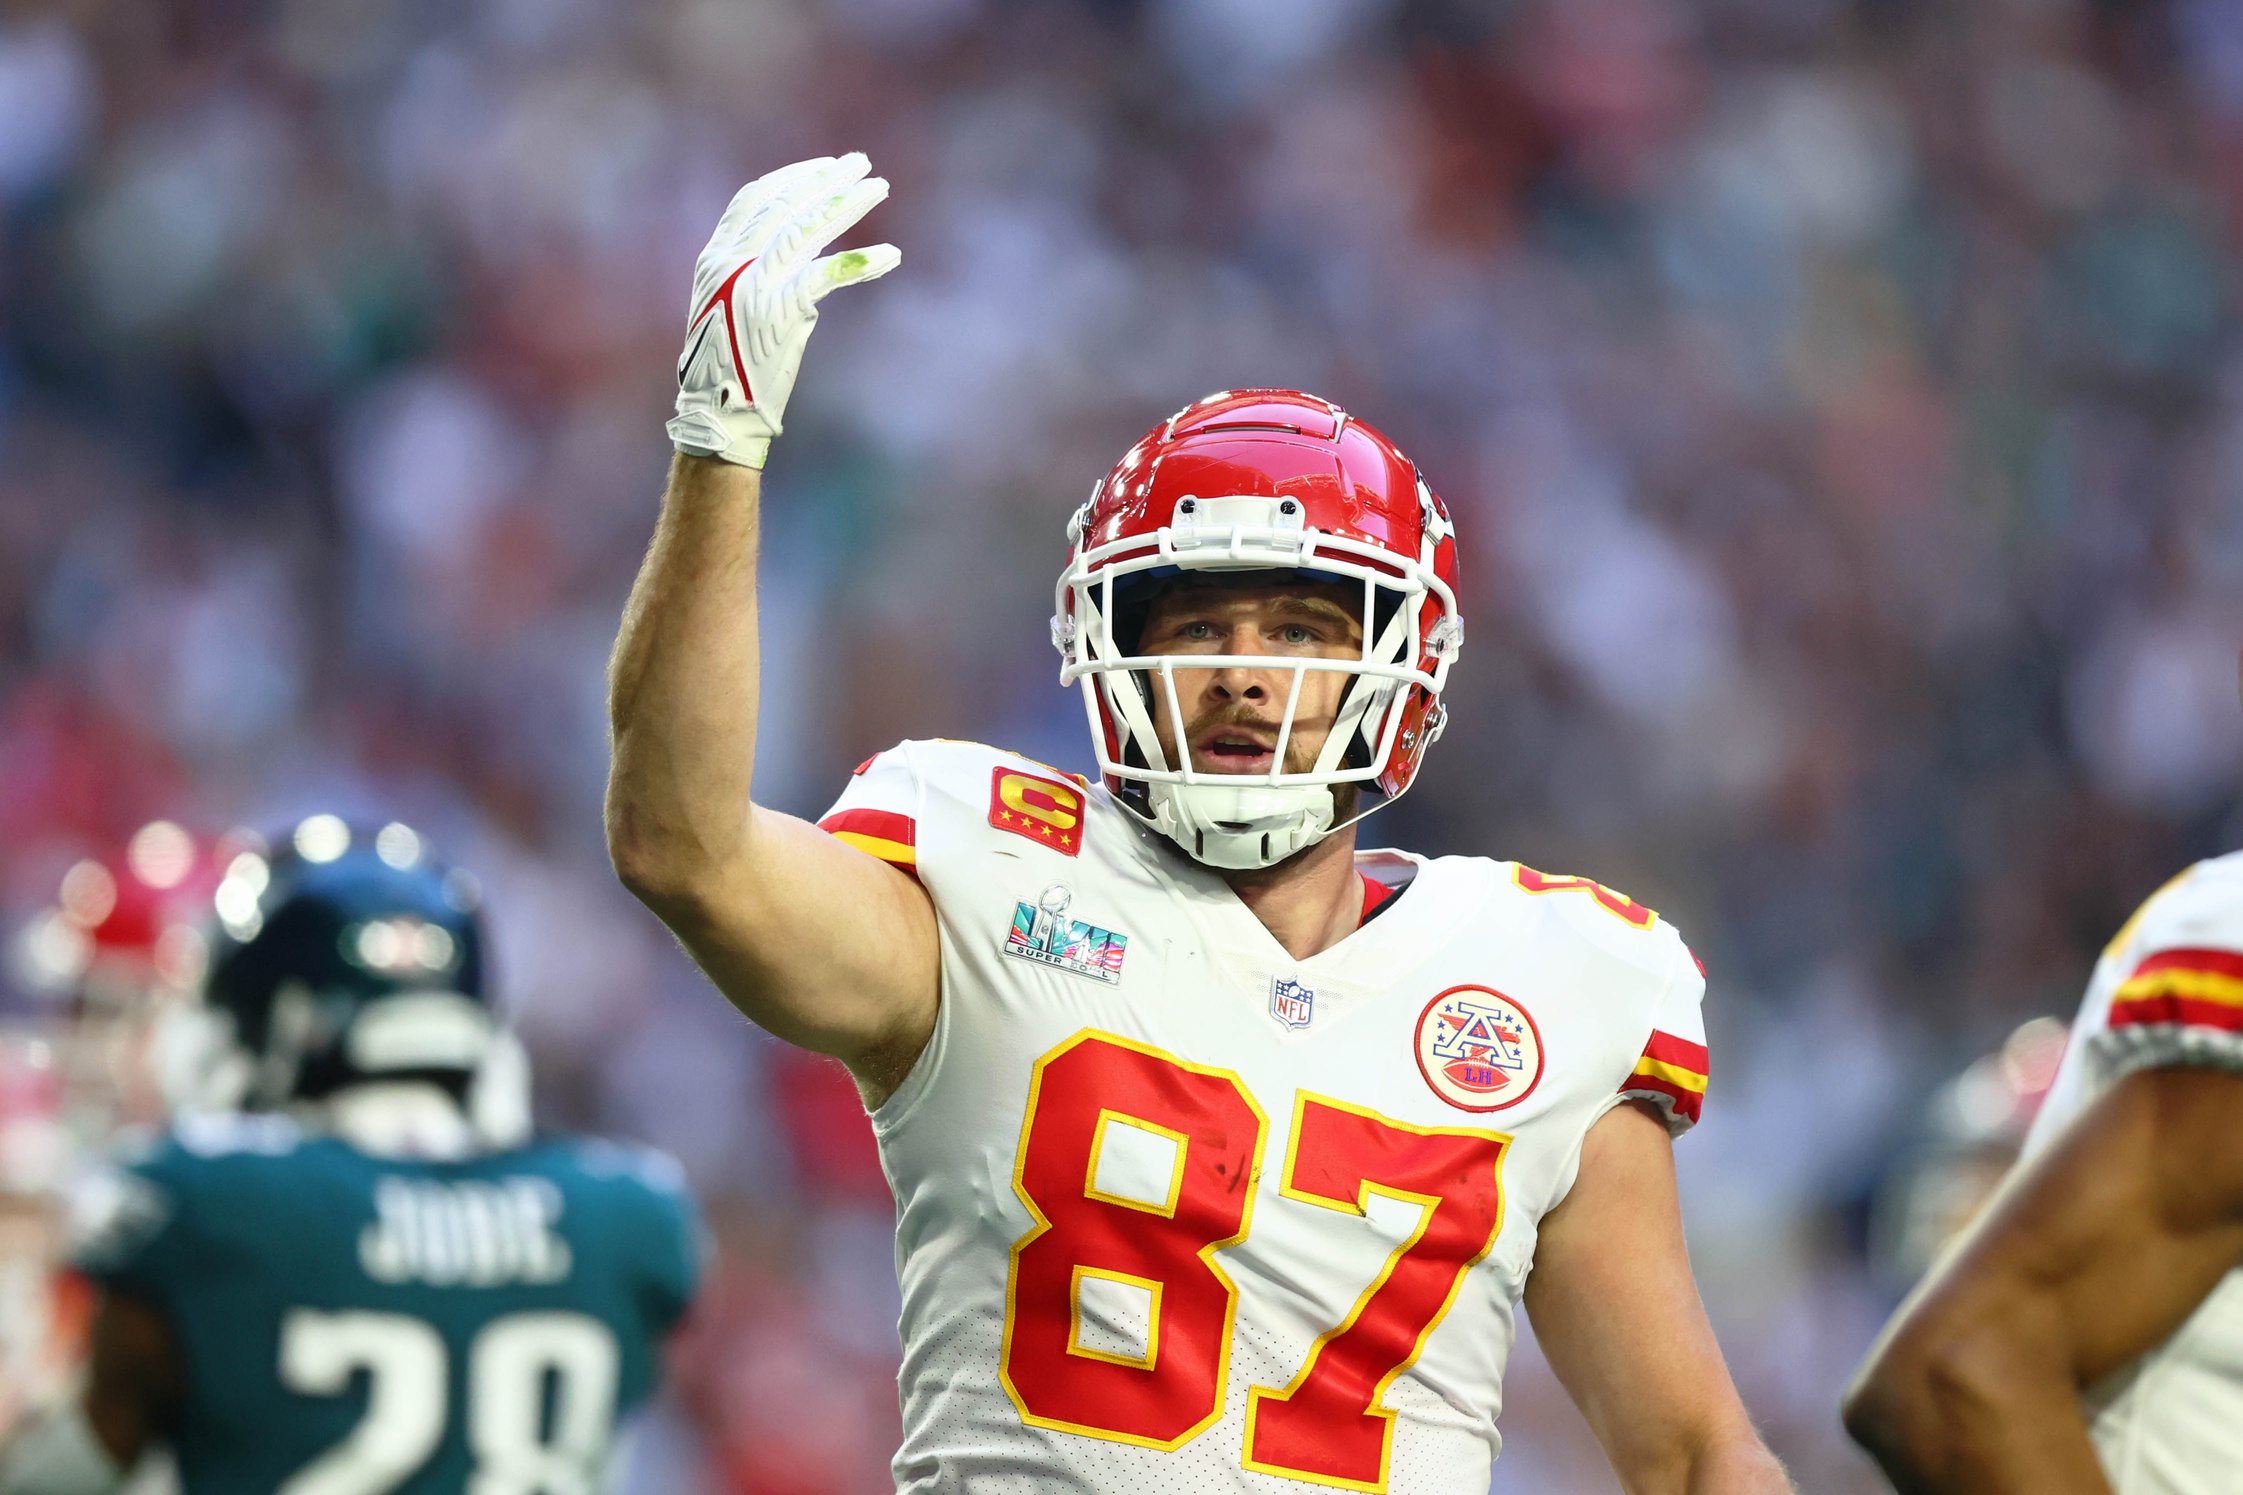 Chiefs' All-Pro TE Travis Kelce hyperextends knee in practice for